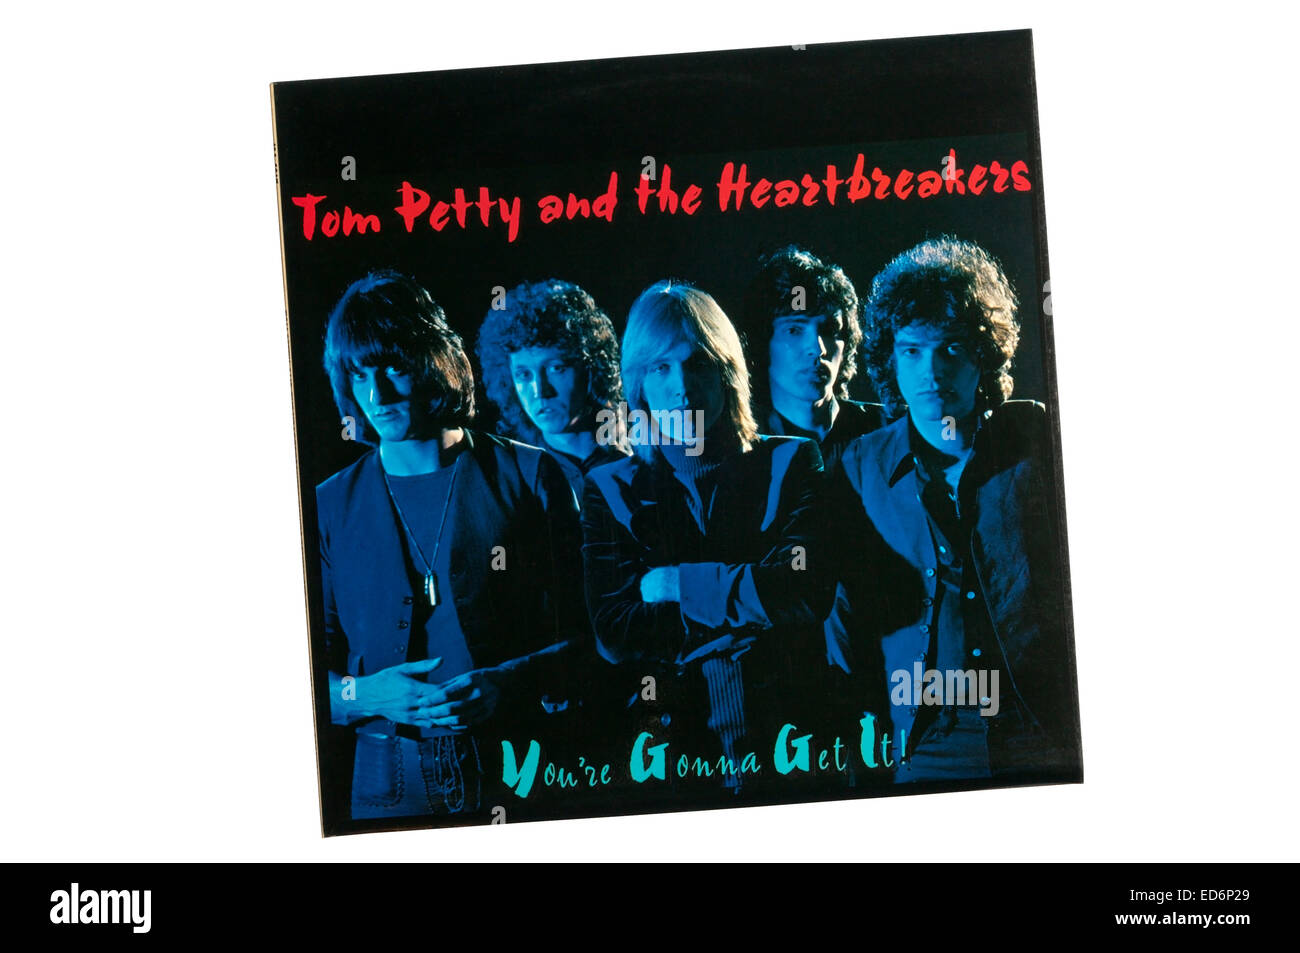 You're Gonna Get It! is the 2nd album by Tom Petty and the Heartbreakers, released in 1978. Stock Photo